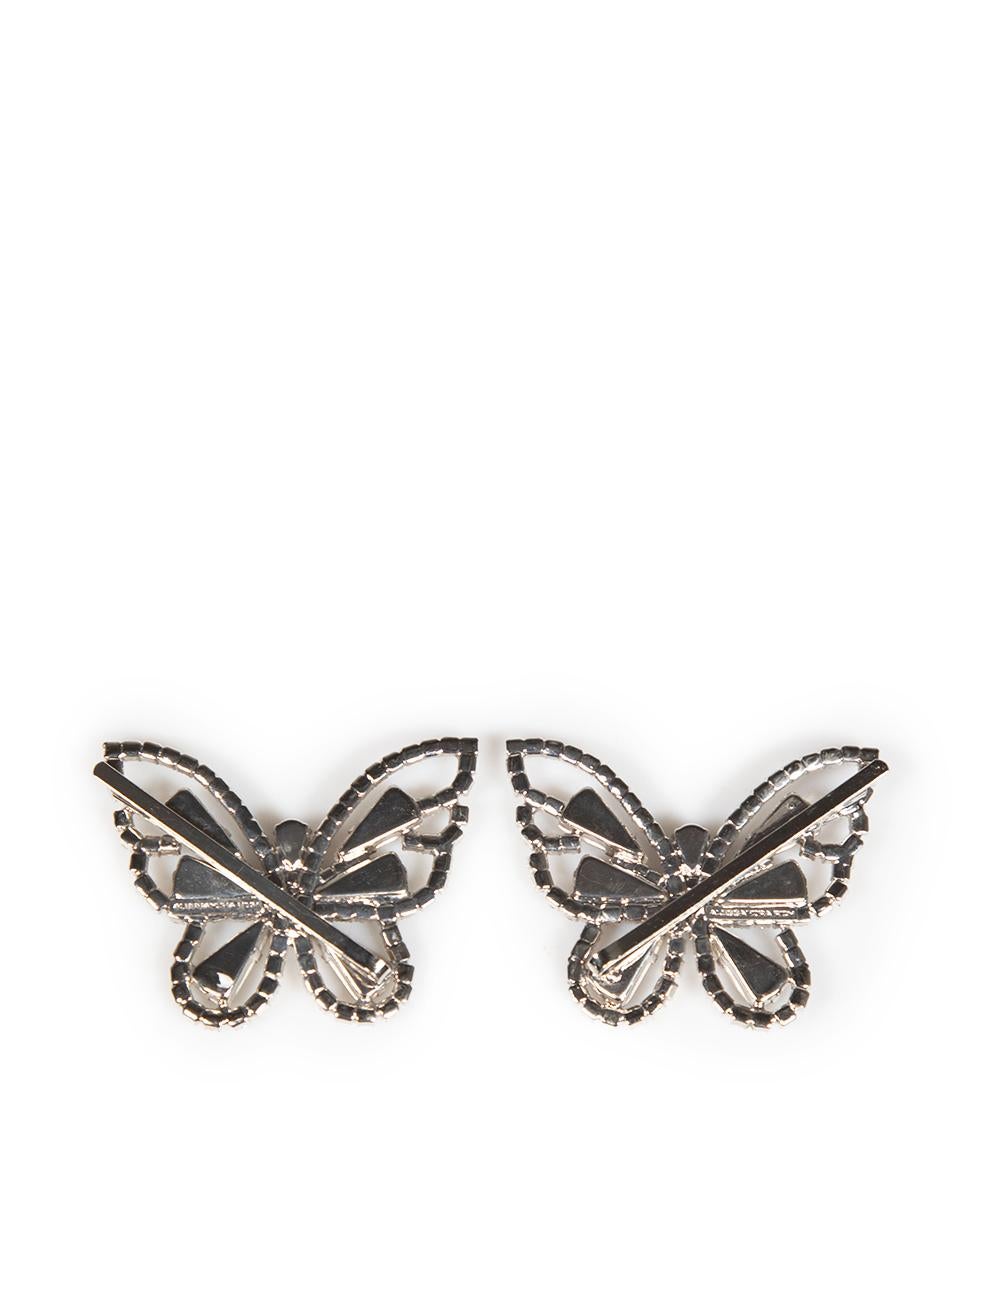 Alessandra Rich Silver Crystal Butterfly Hair Clips In New Condition For Sale In London, GB